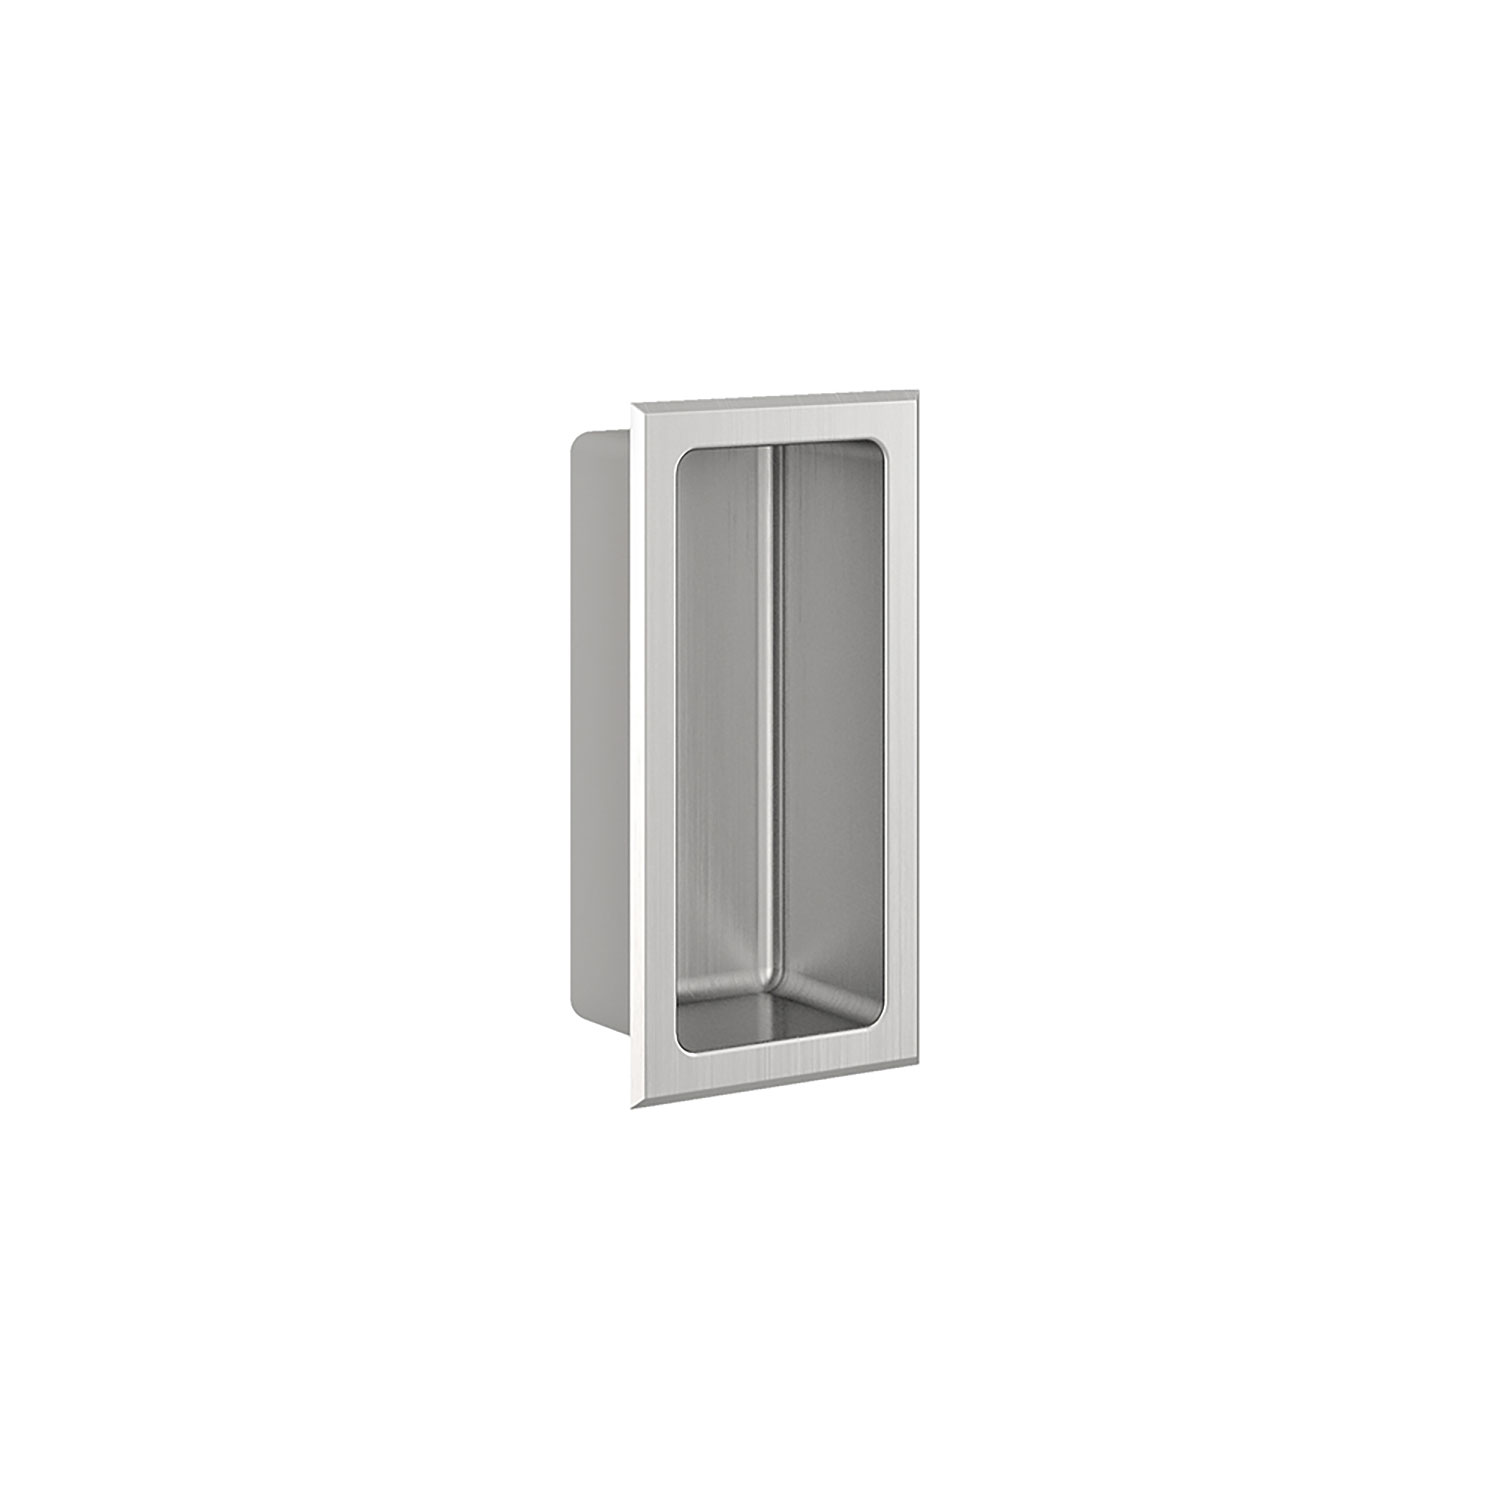 Brushed stainless steel niche 6